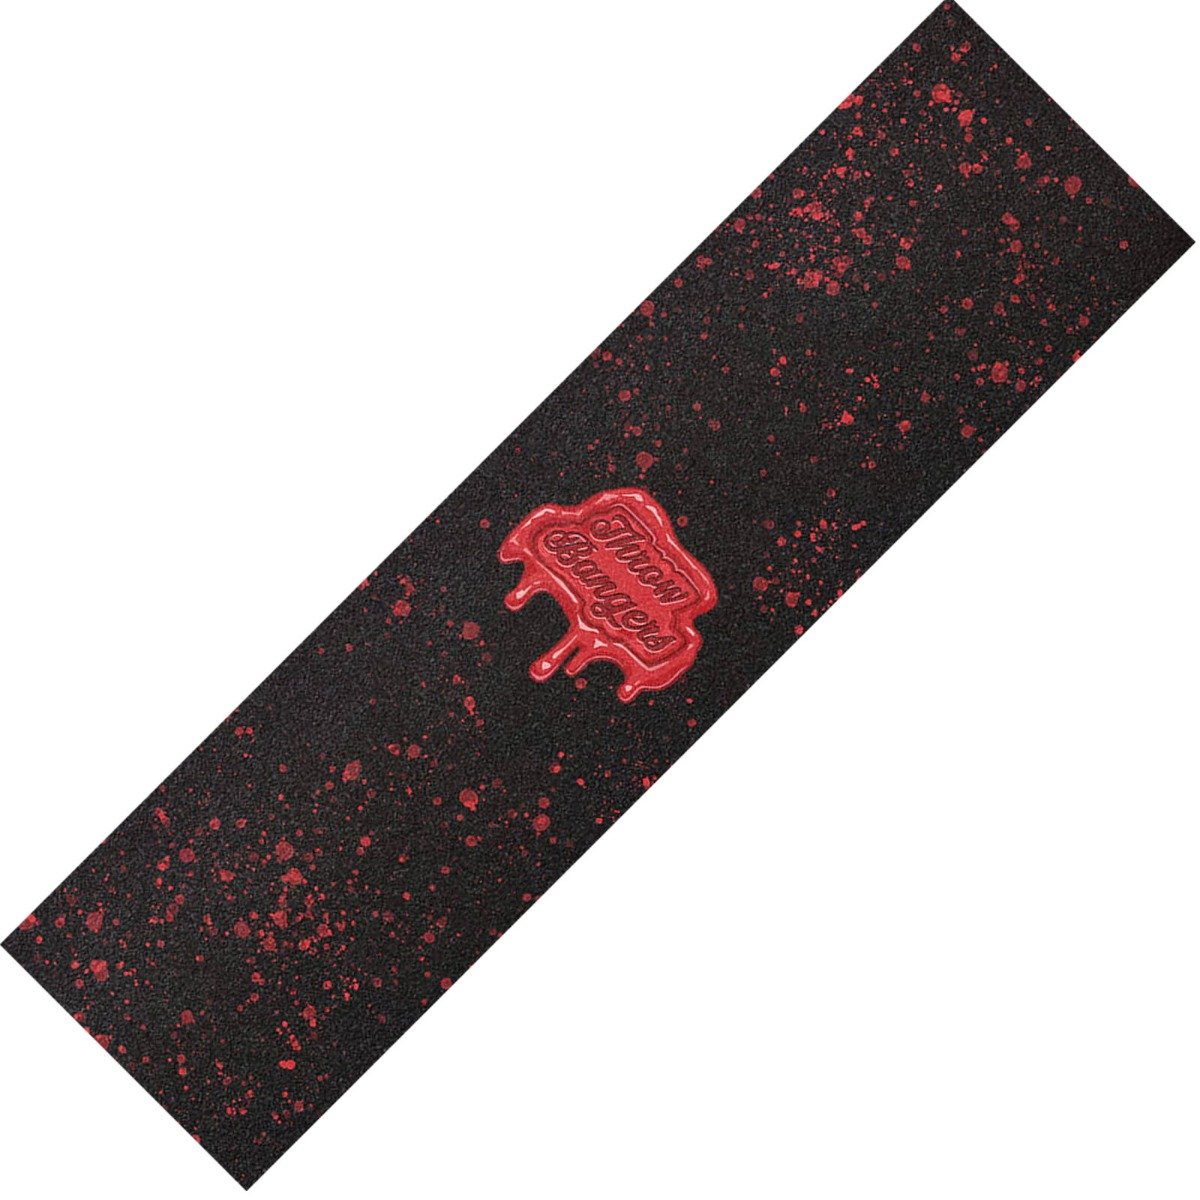 An image of Figz Collection XL Pro Scooter Griptape - Throw Bangers - 23" x 5.5"